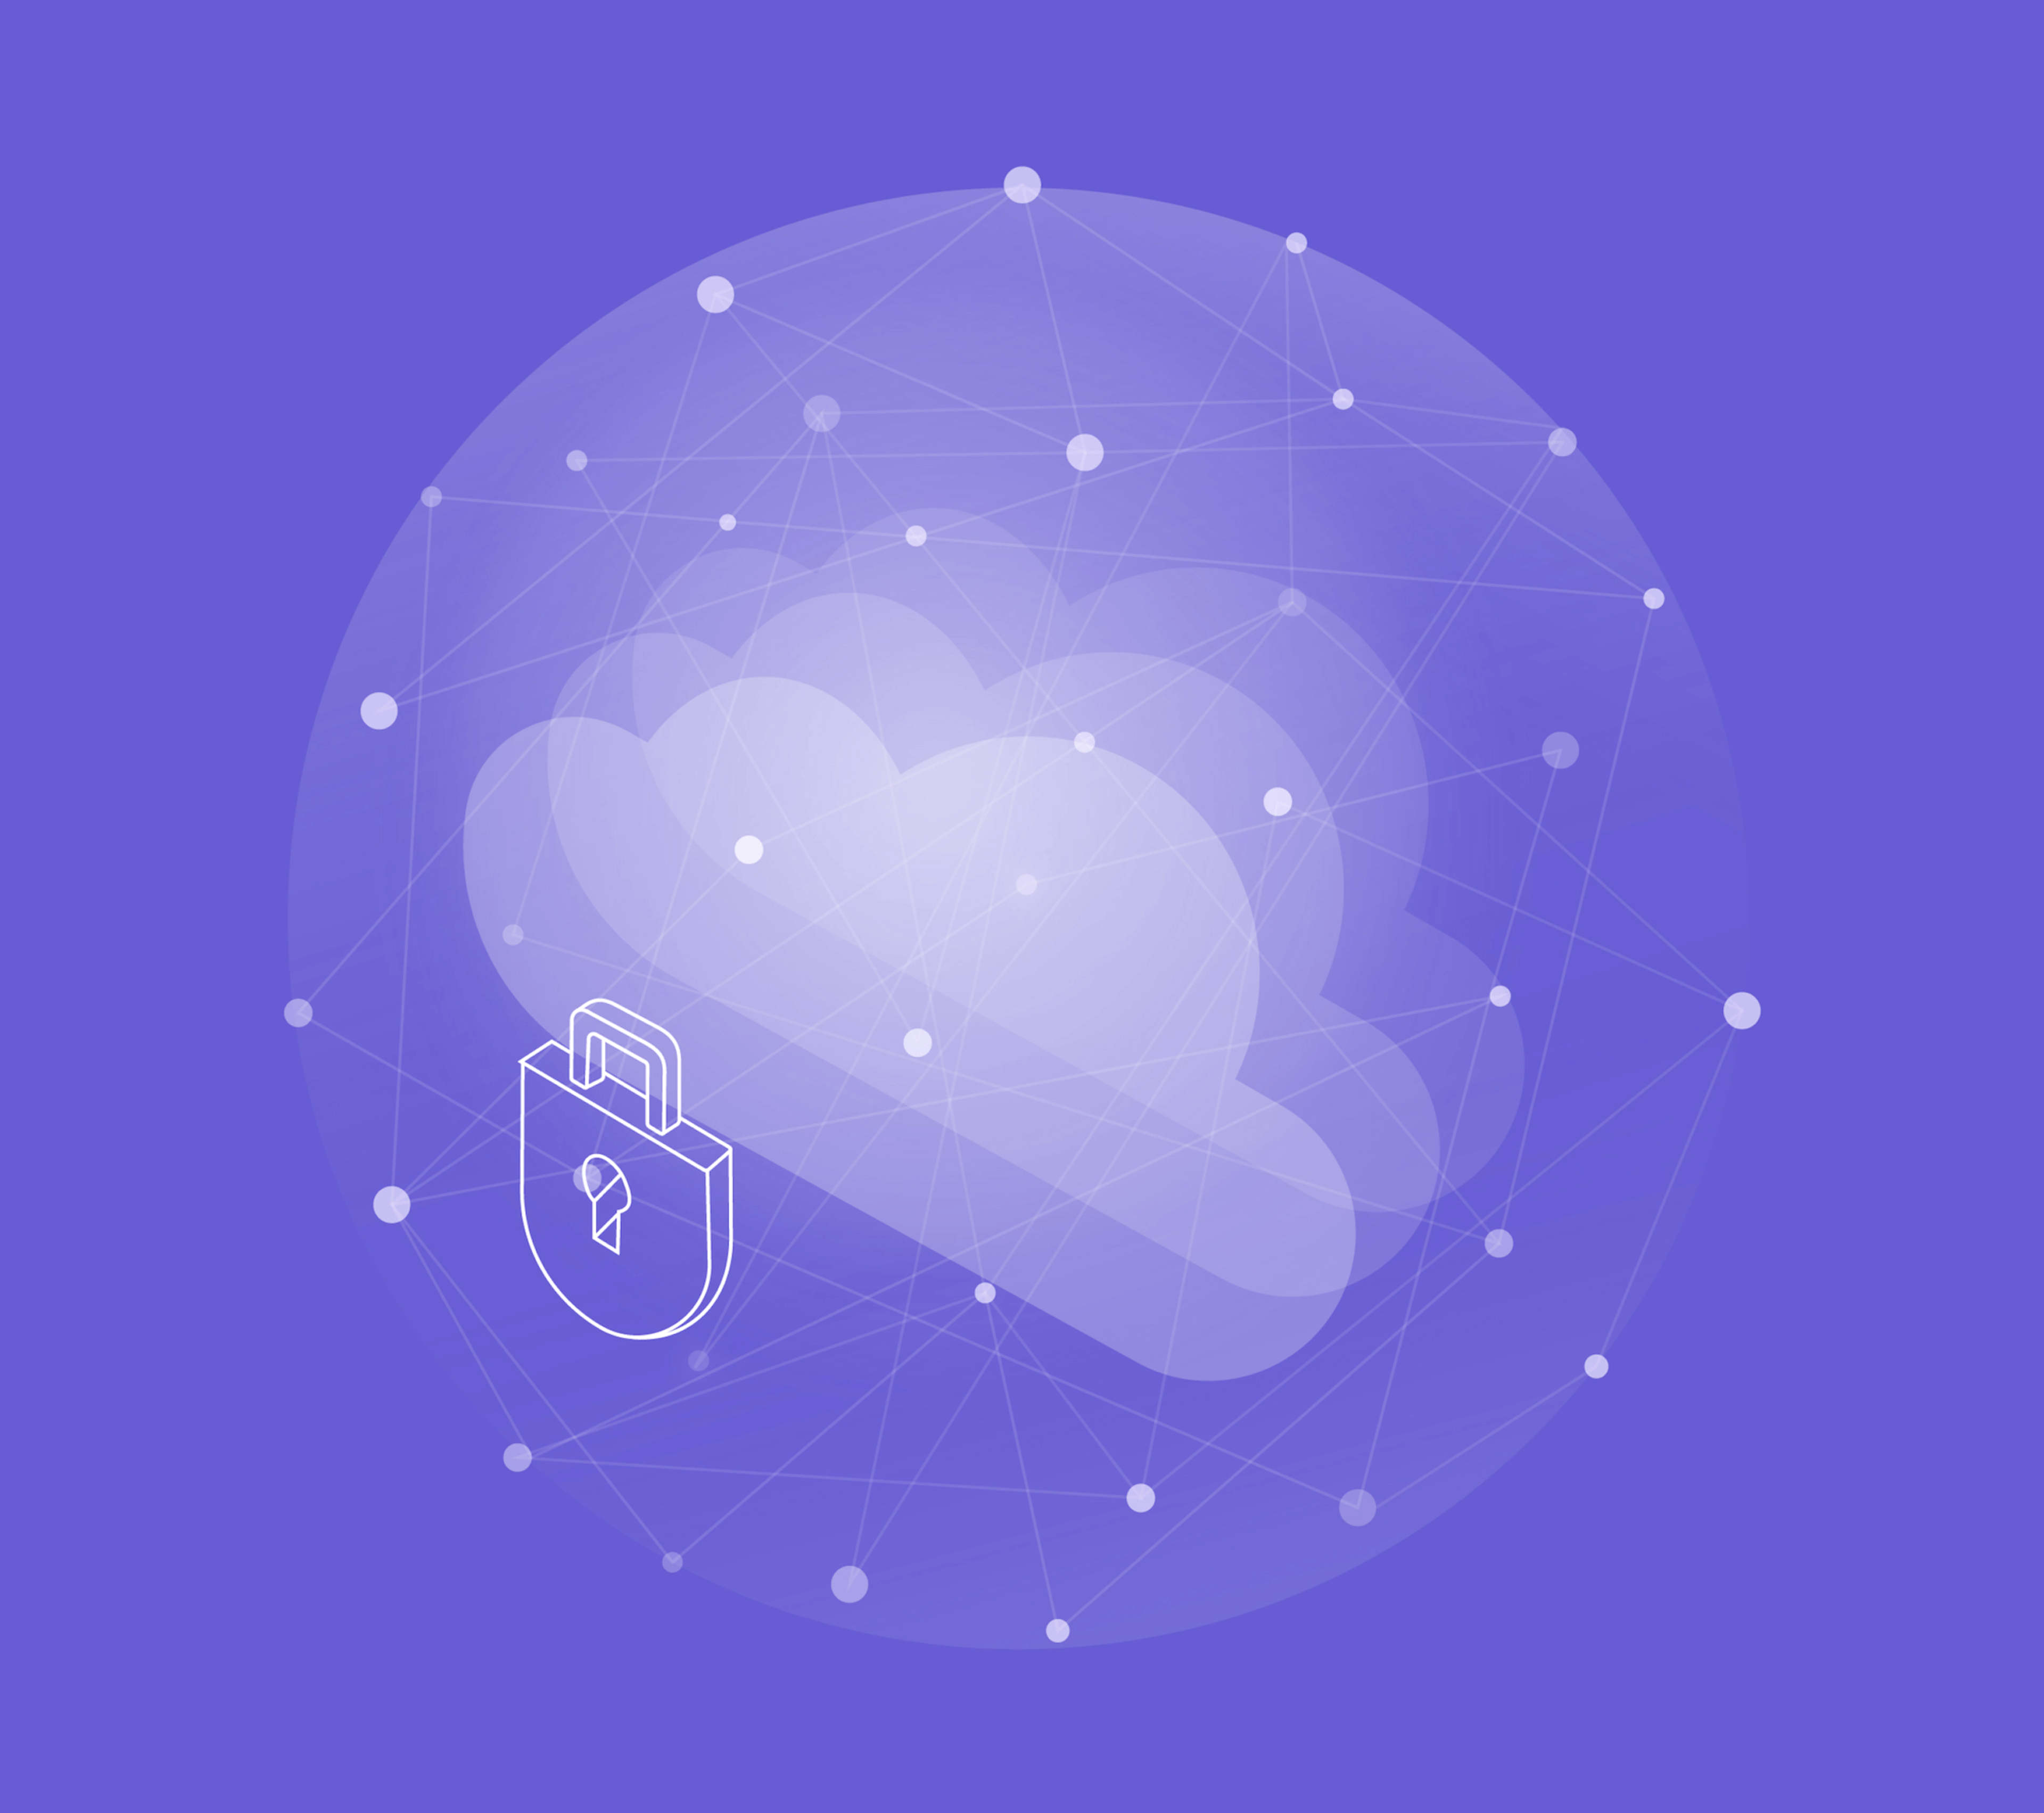 A vector image of a lock superimposed over transparent clouds, representing the concept of security.